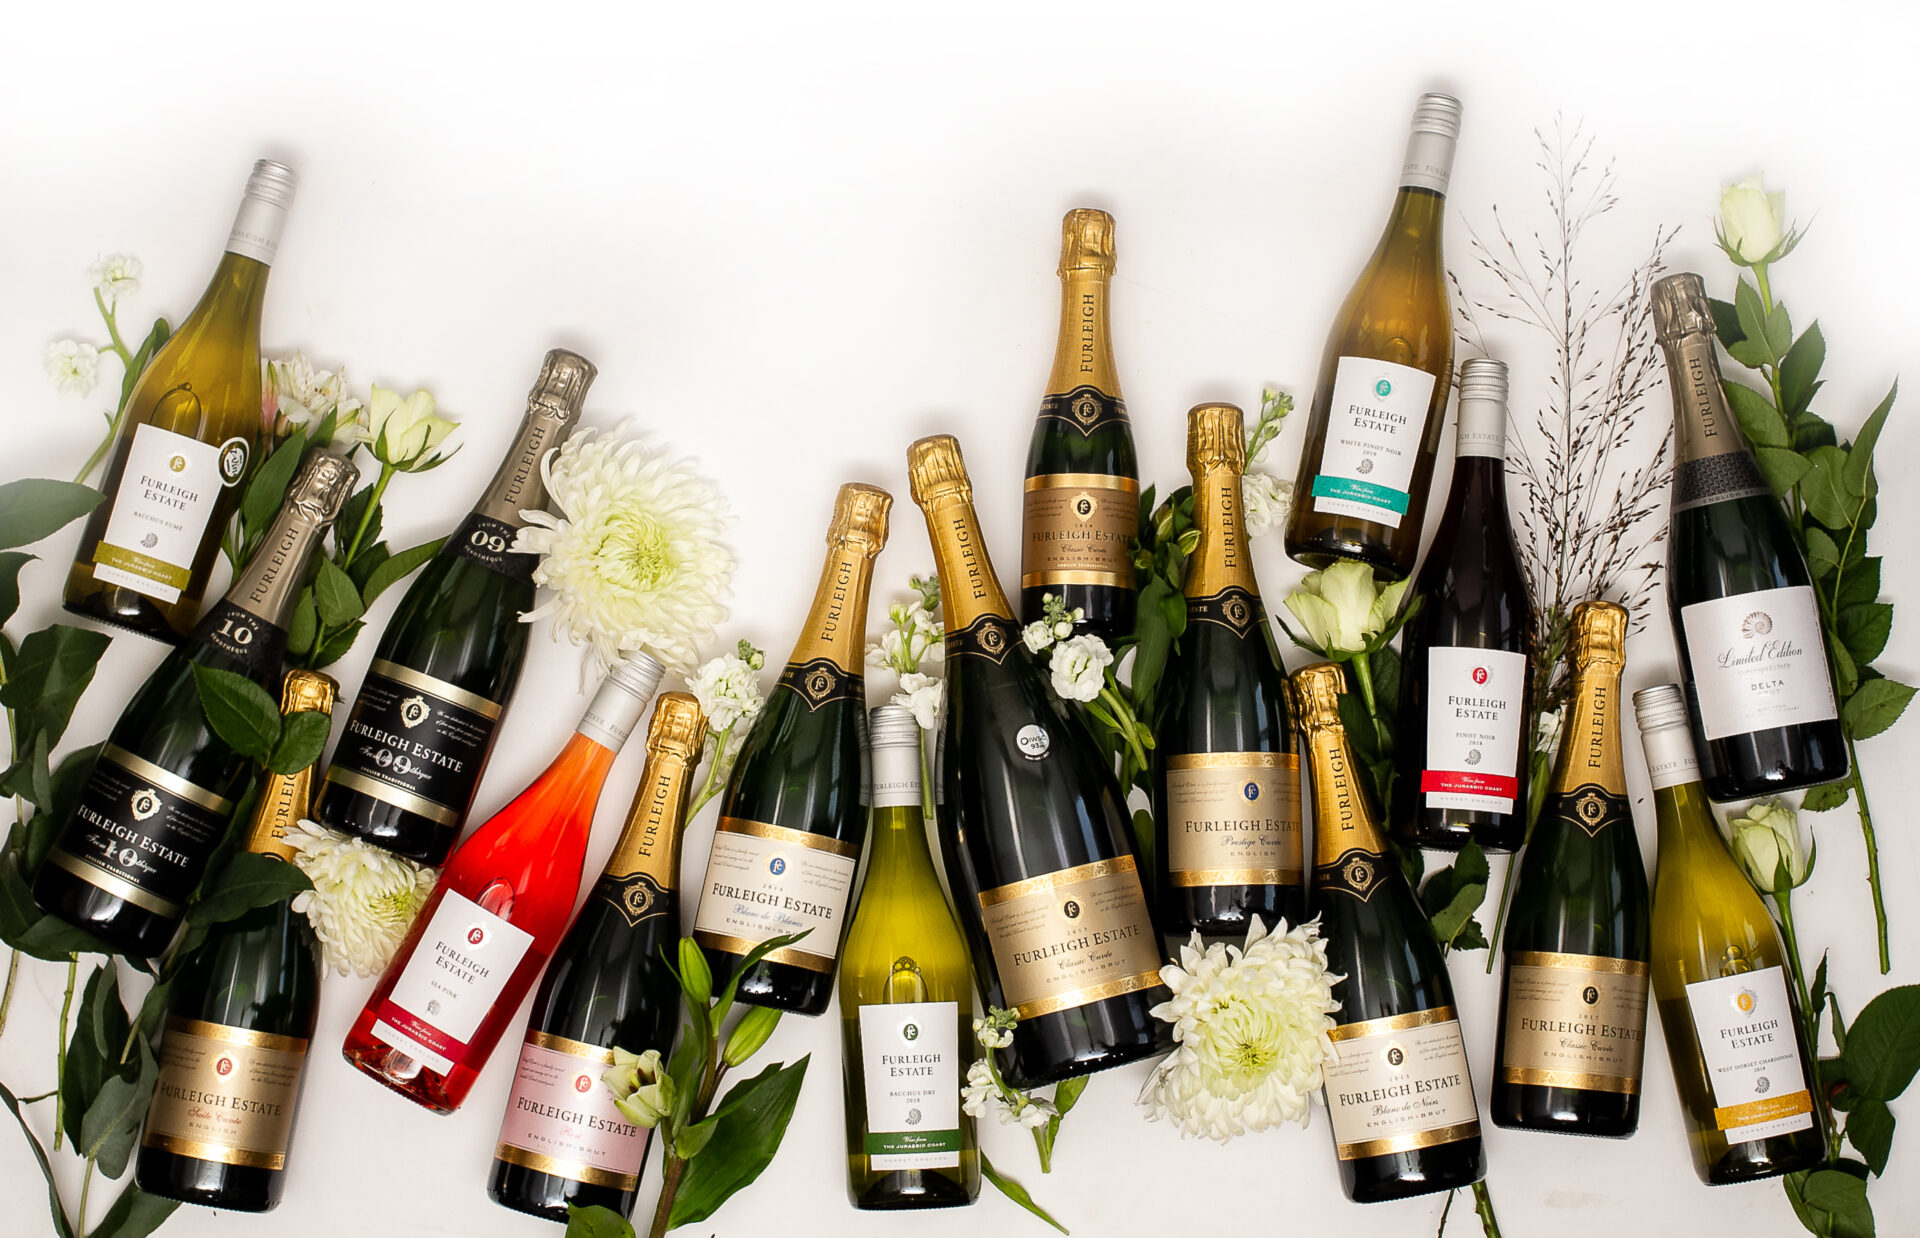 A spread of Furleigh Estate sparkling and still wines on a white table with white flowers.